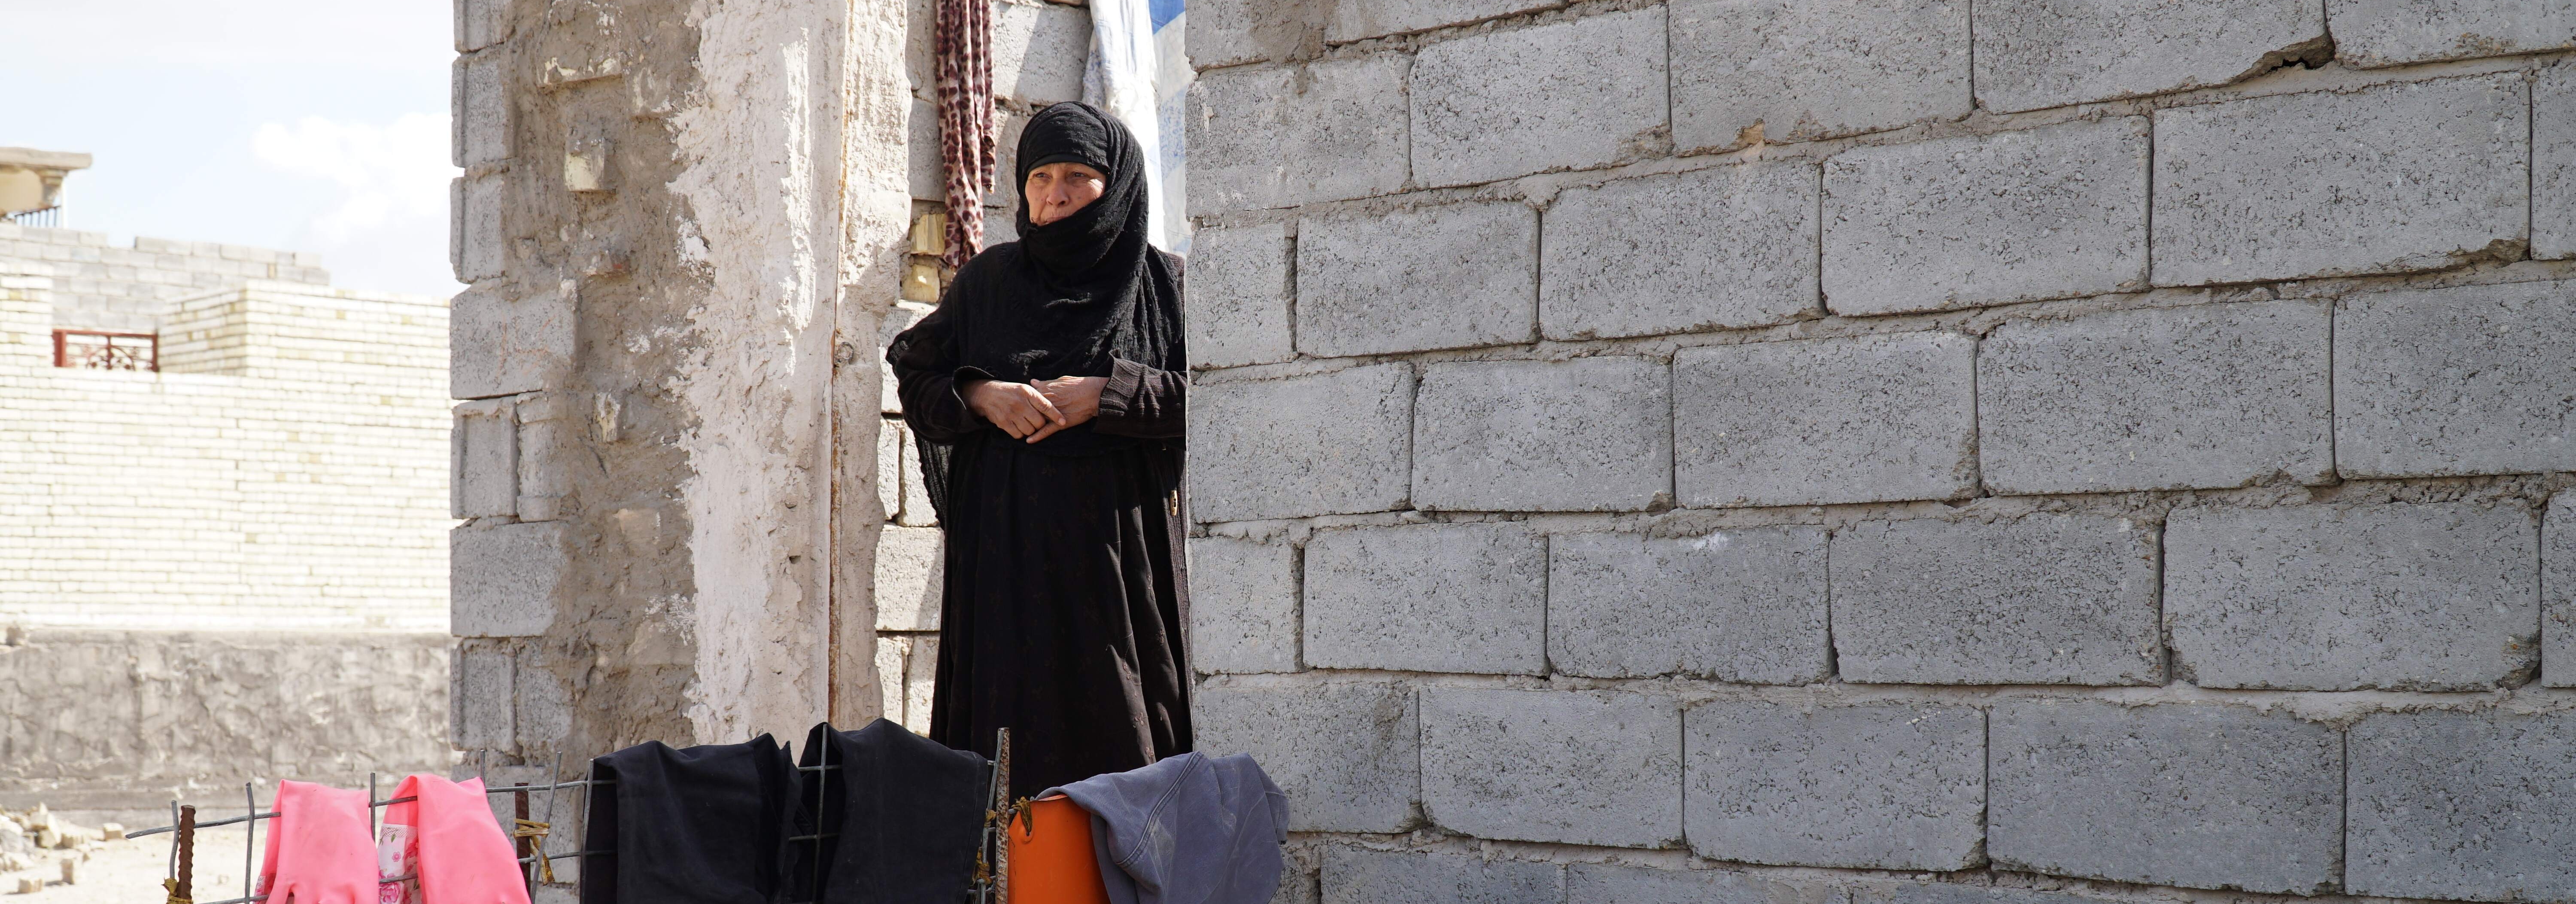 A woman stands near the entrance to her rehabilitated home in Fallujah